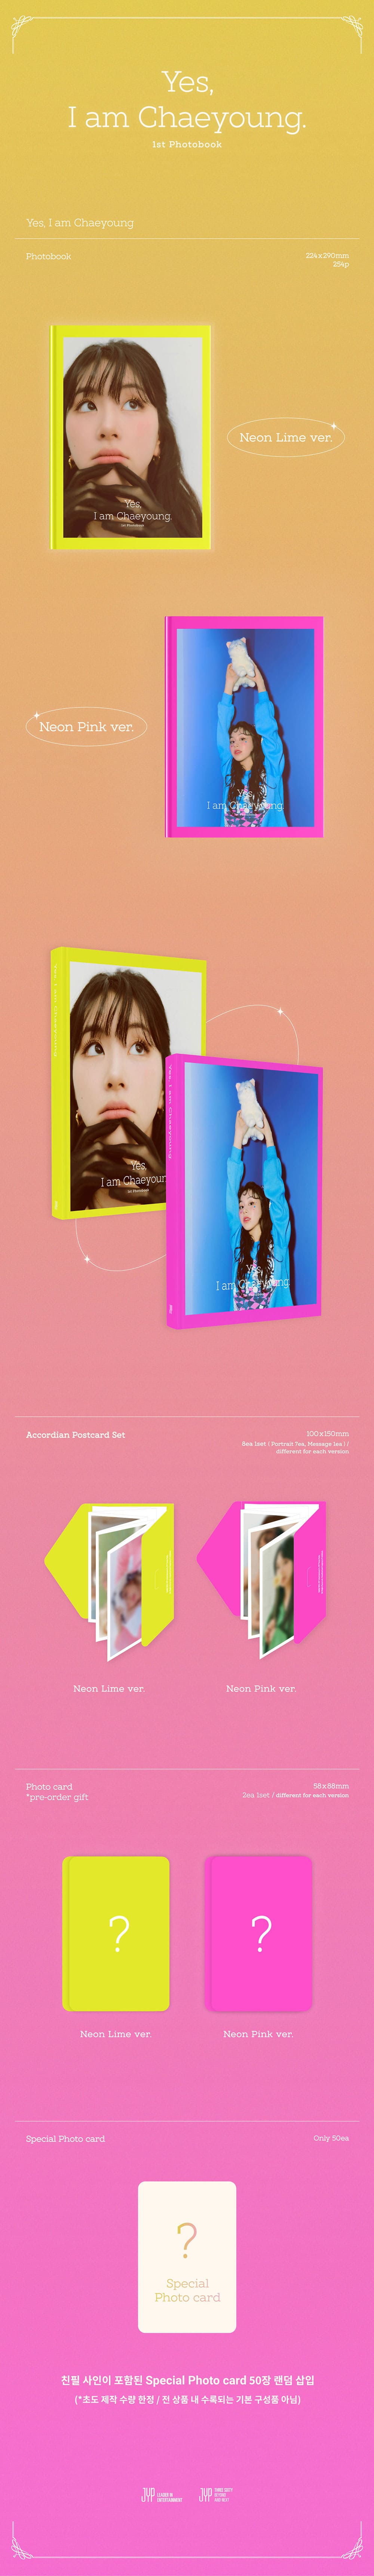 CHAEYOUNG - 1ST PHOTOBOOK [YES, I AM CHAEYOUNG]